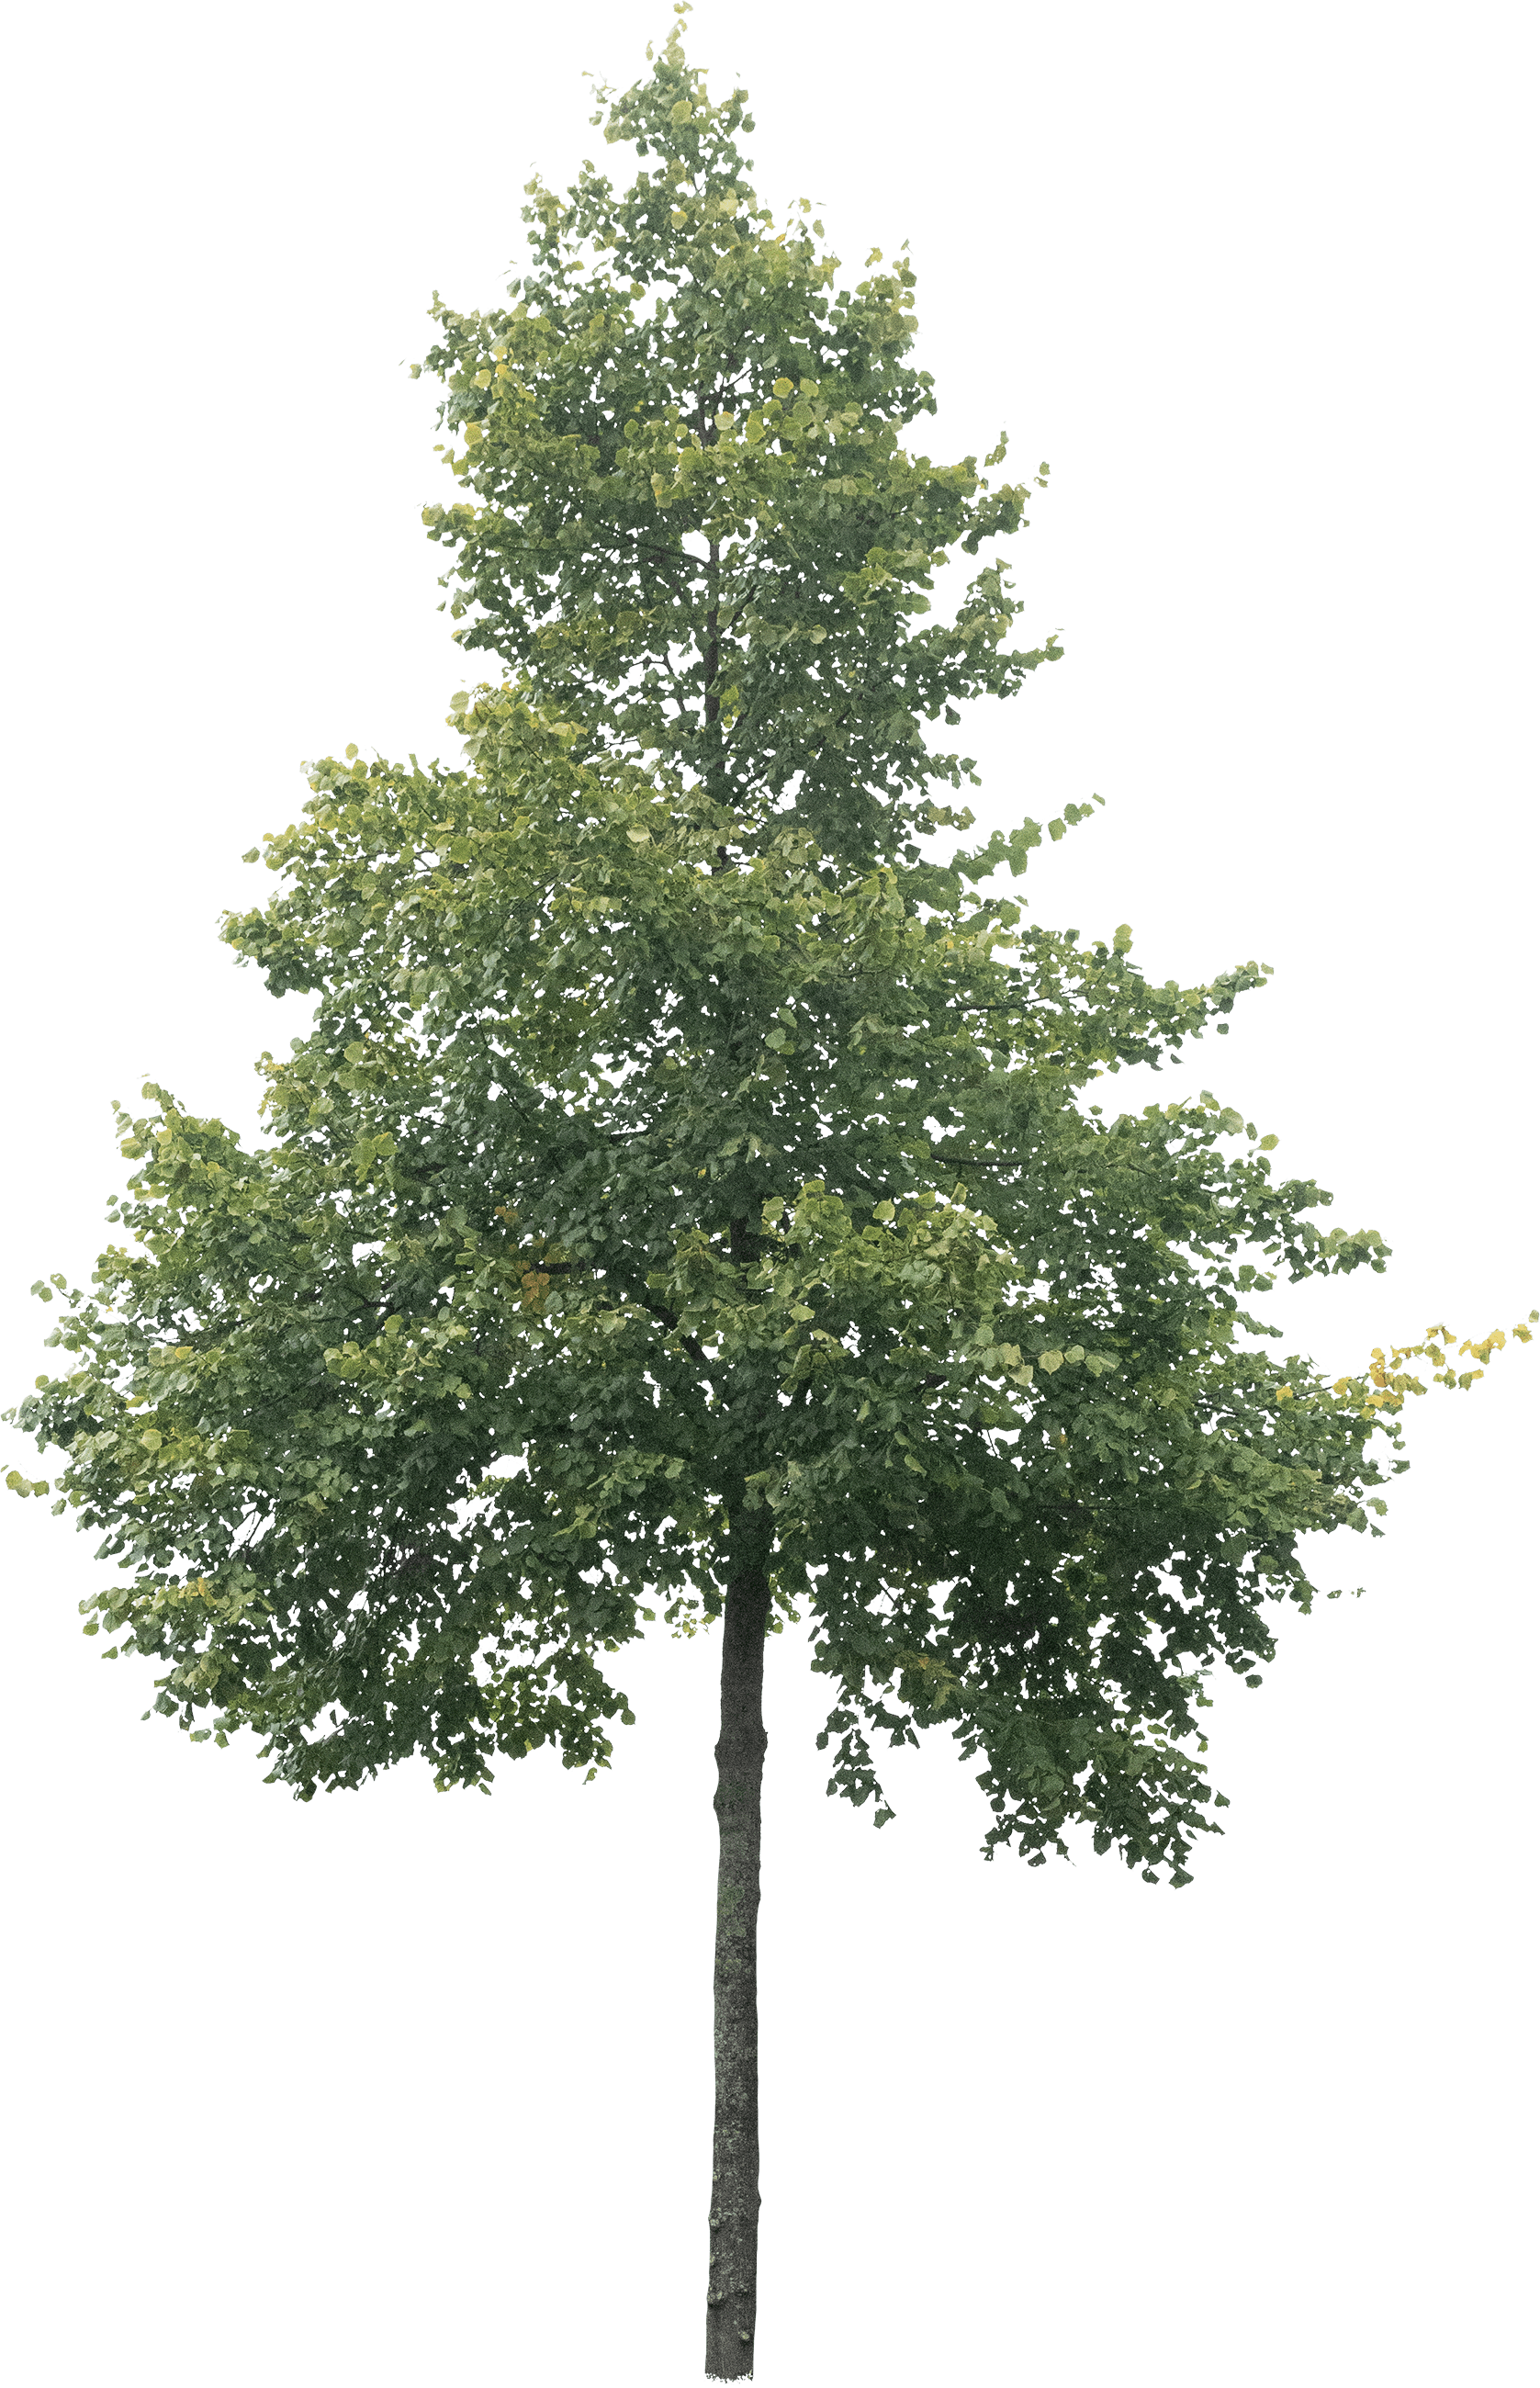 meye_S2641_tilia-europaea.png meye_S2643_tilia-europaea.png